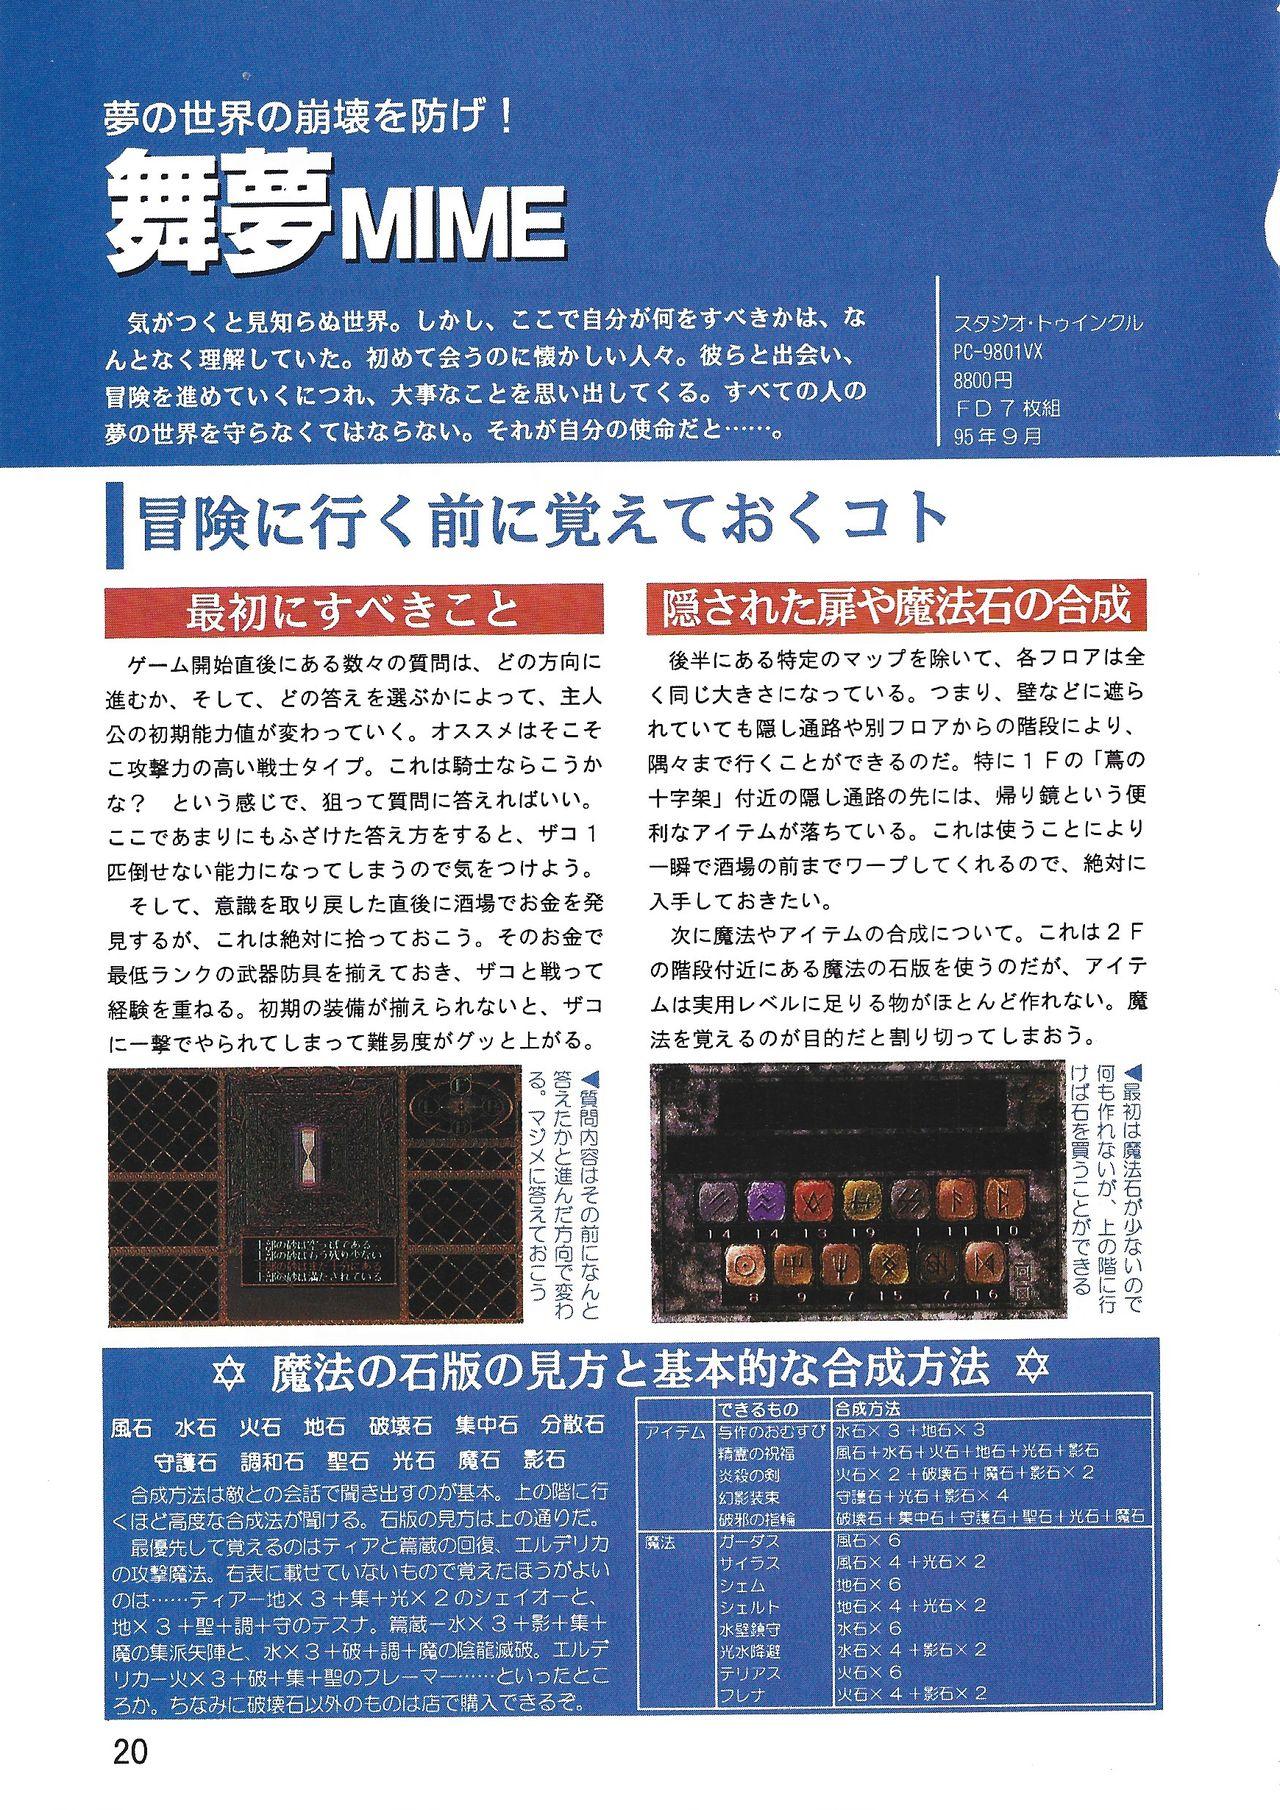 PC Bishoujo Software Strategy Book: Strategy King 2 19